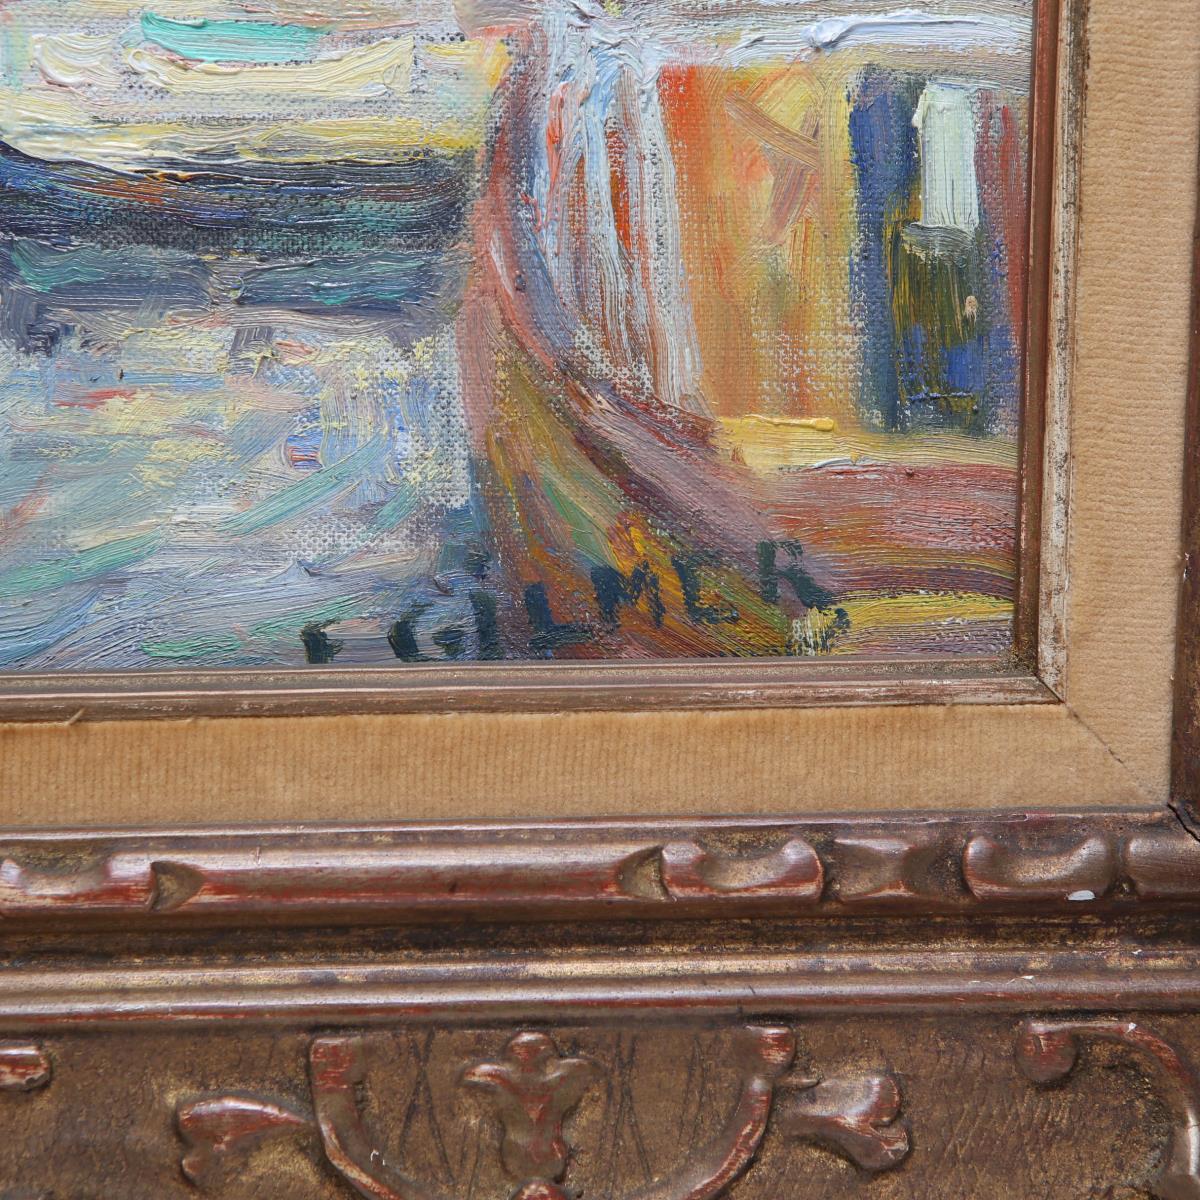 French Impressionist manner framed marine landscape oil on canvas with tugboat in harbor, titled 'St. Raphael au printemps' on the back and signed 'Gilmer' on the front lower right corner. The piece is in great vintage condition.